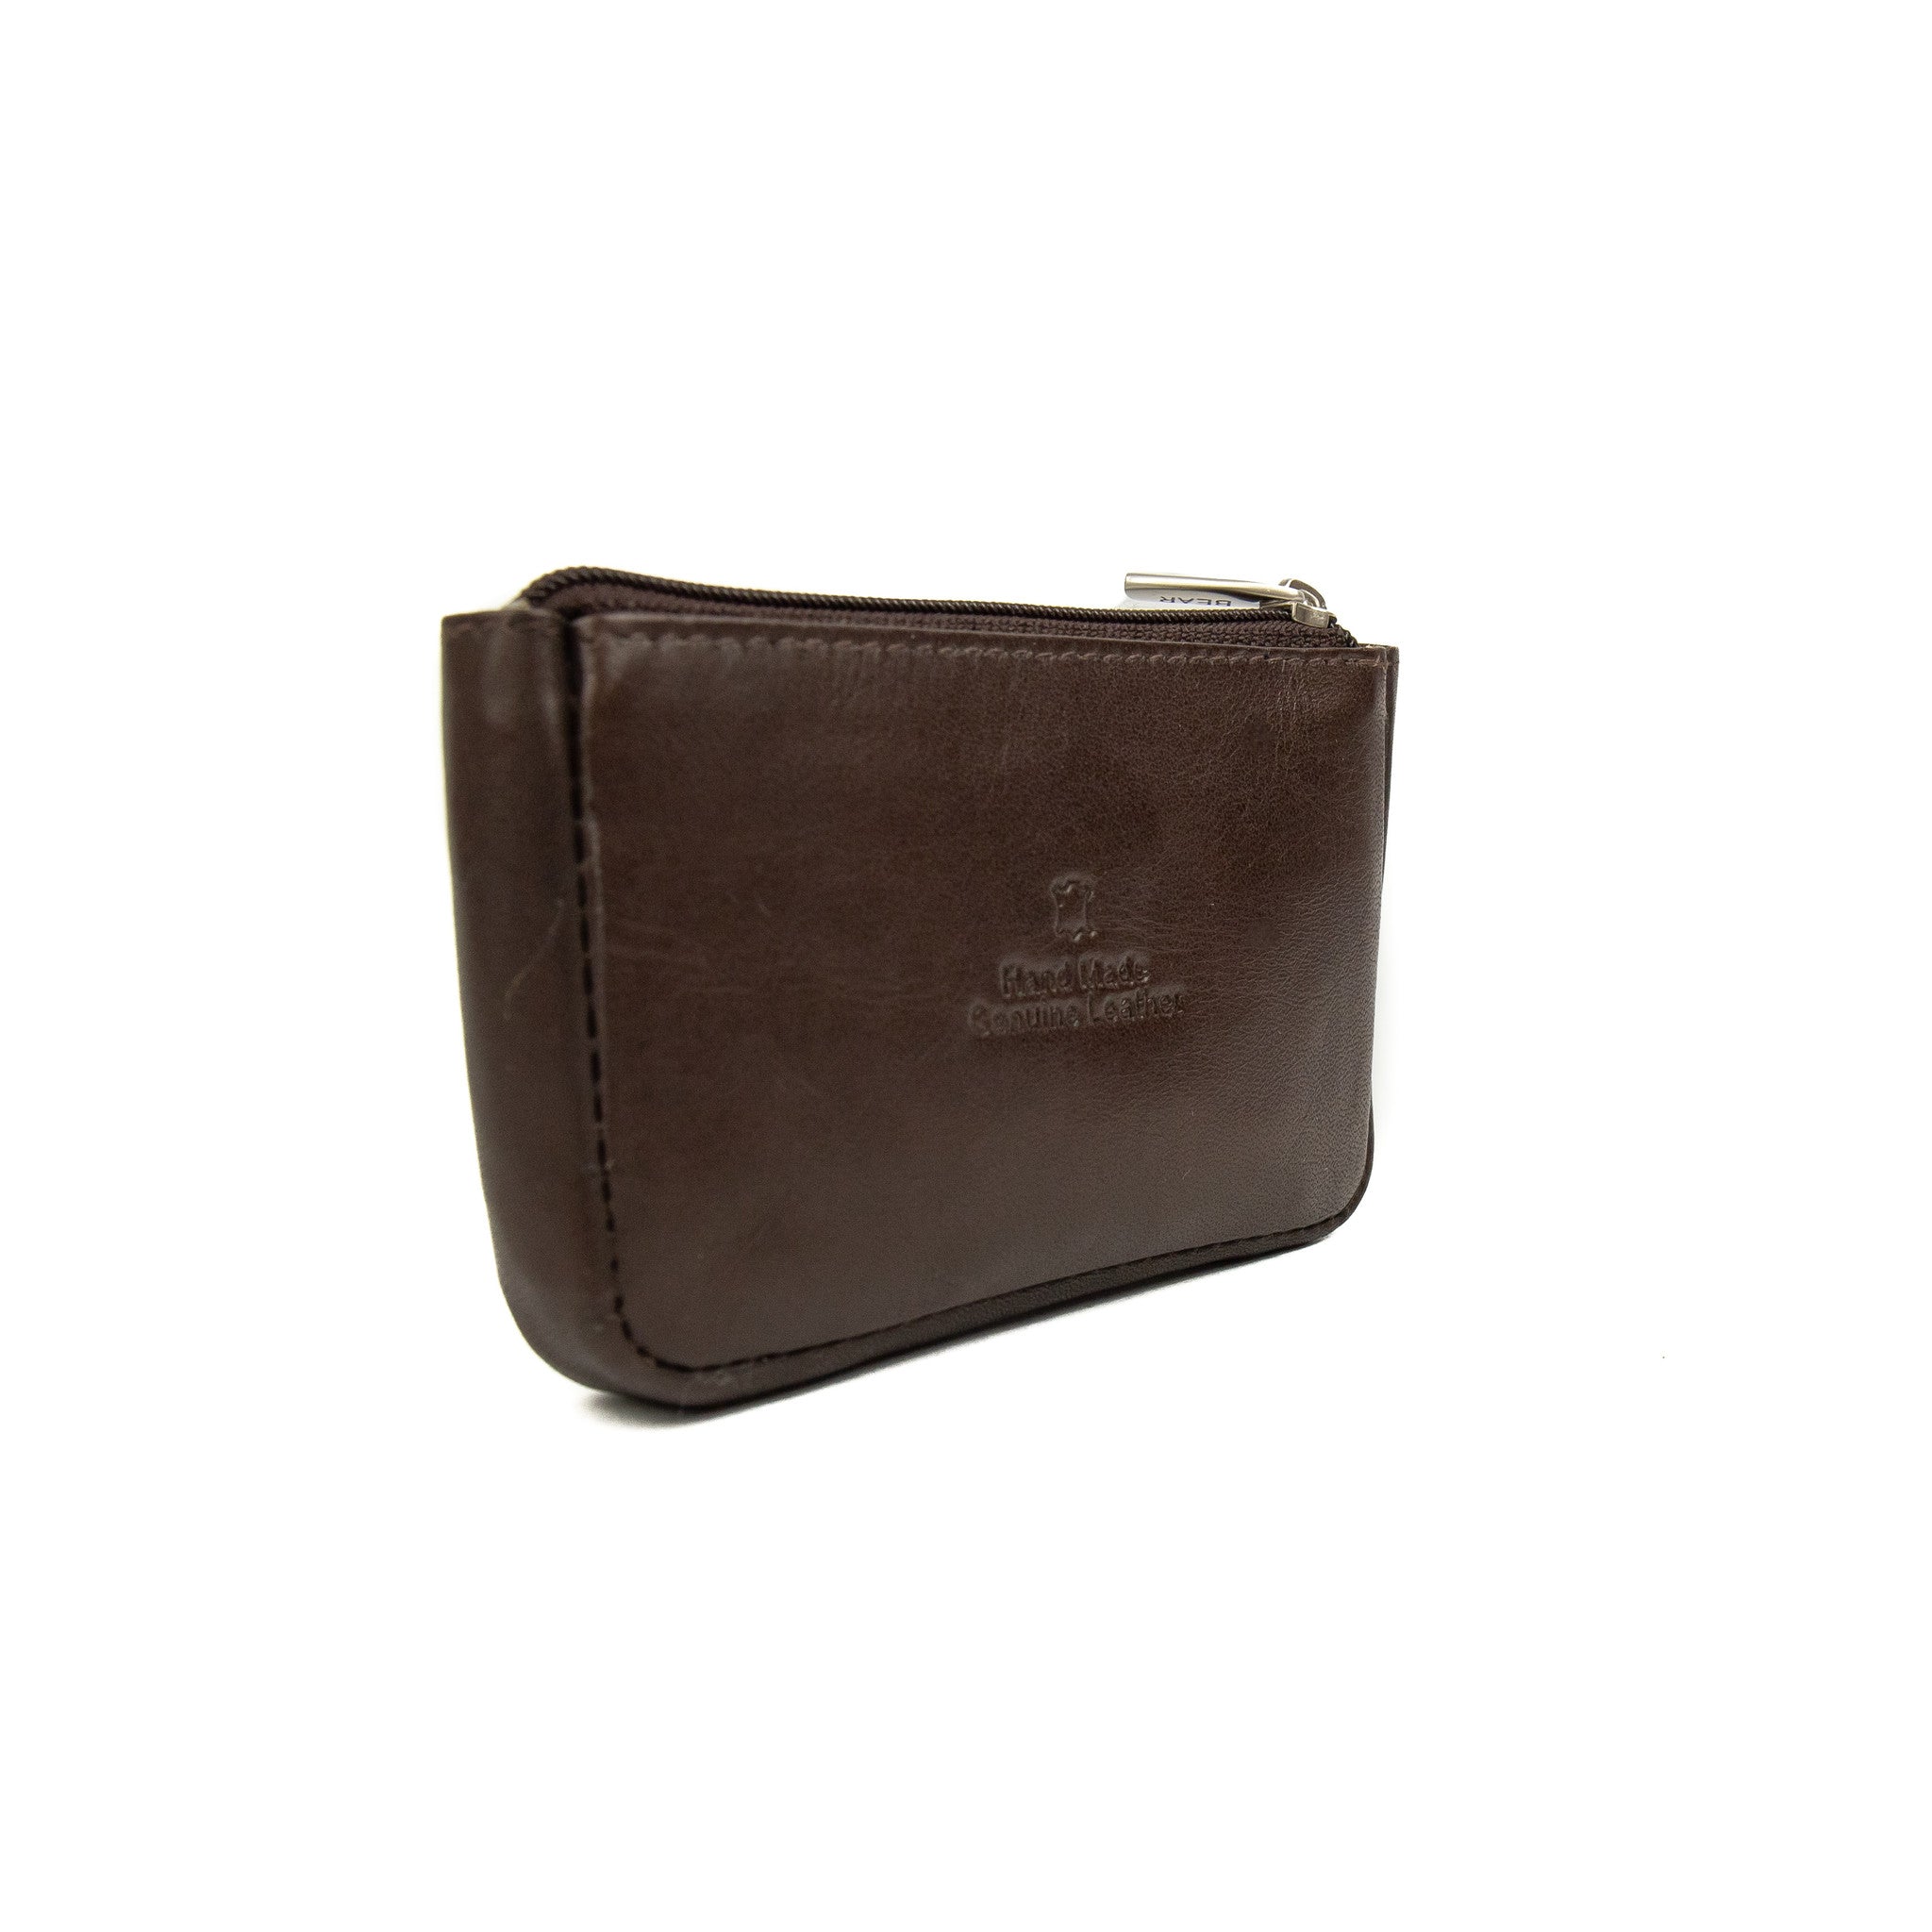 Key pouch/ransom wallet M 7616 brown